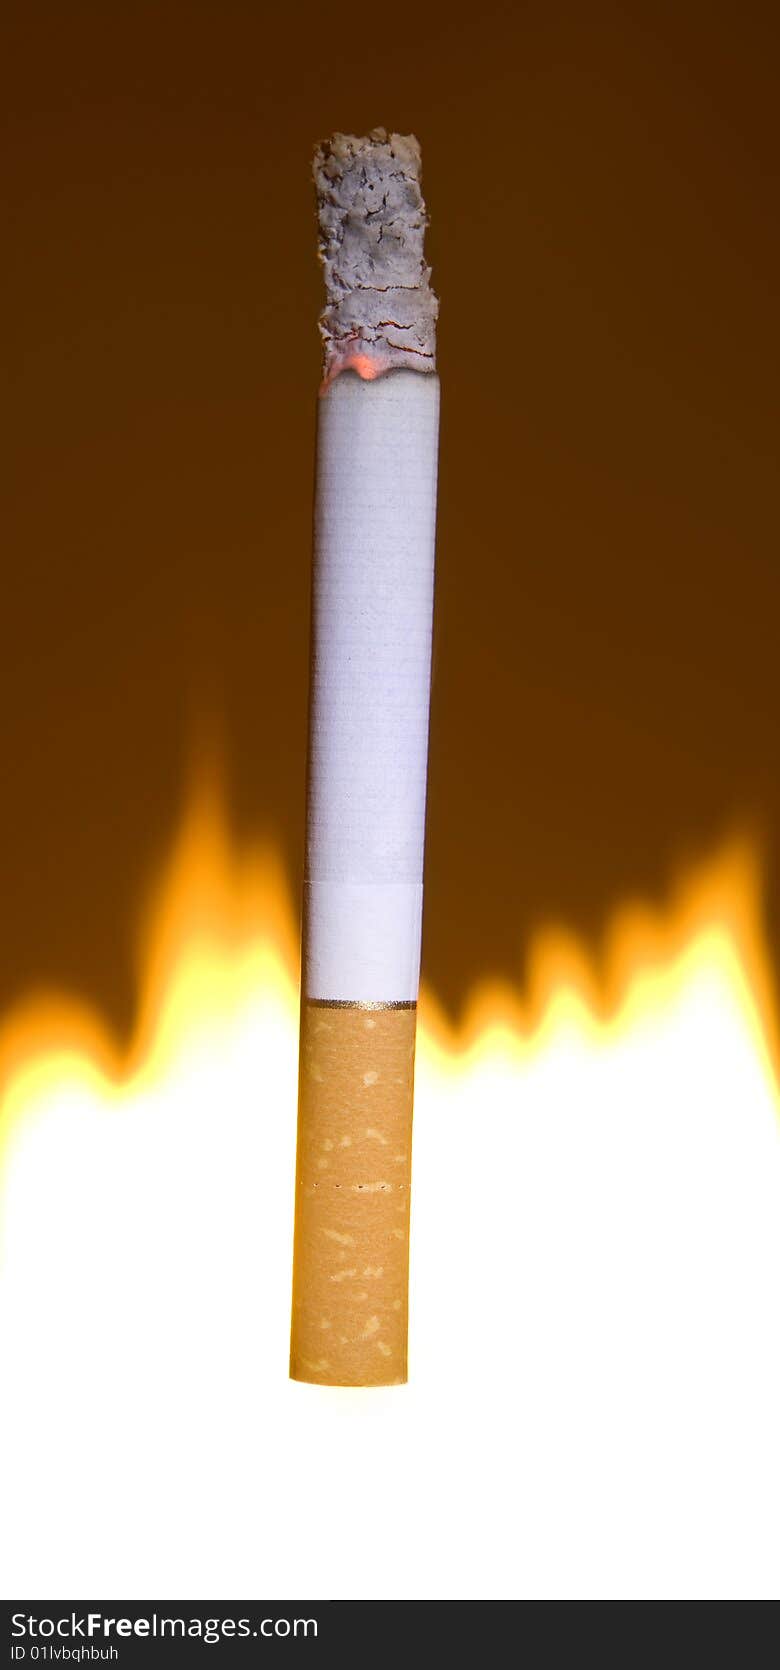 Cigarette on the fire background